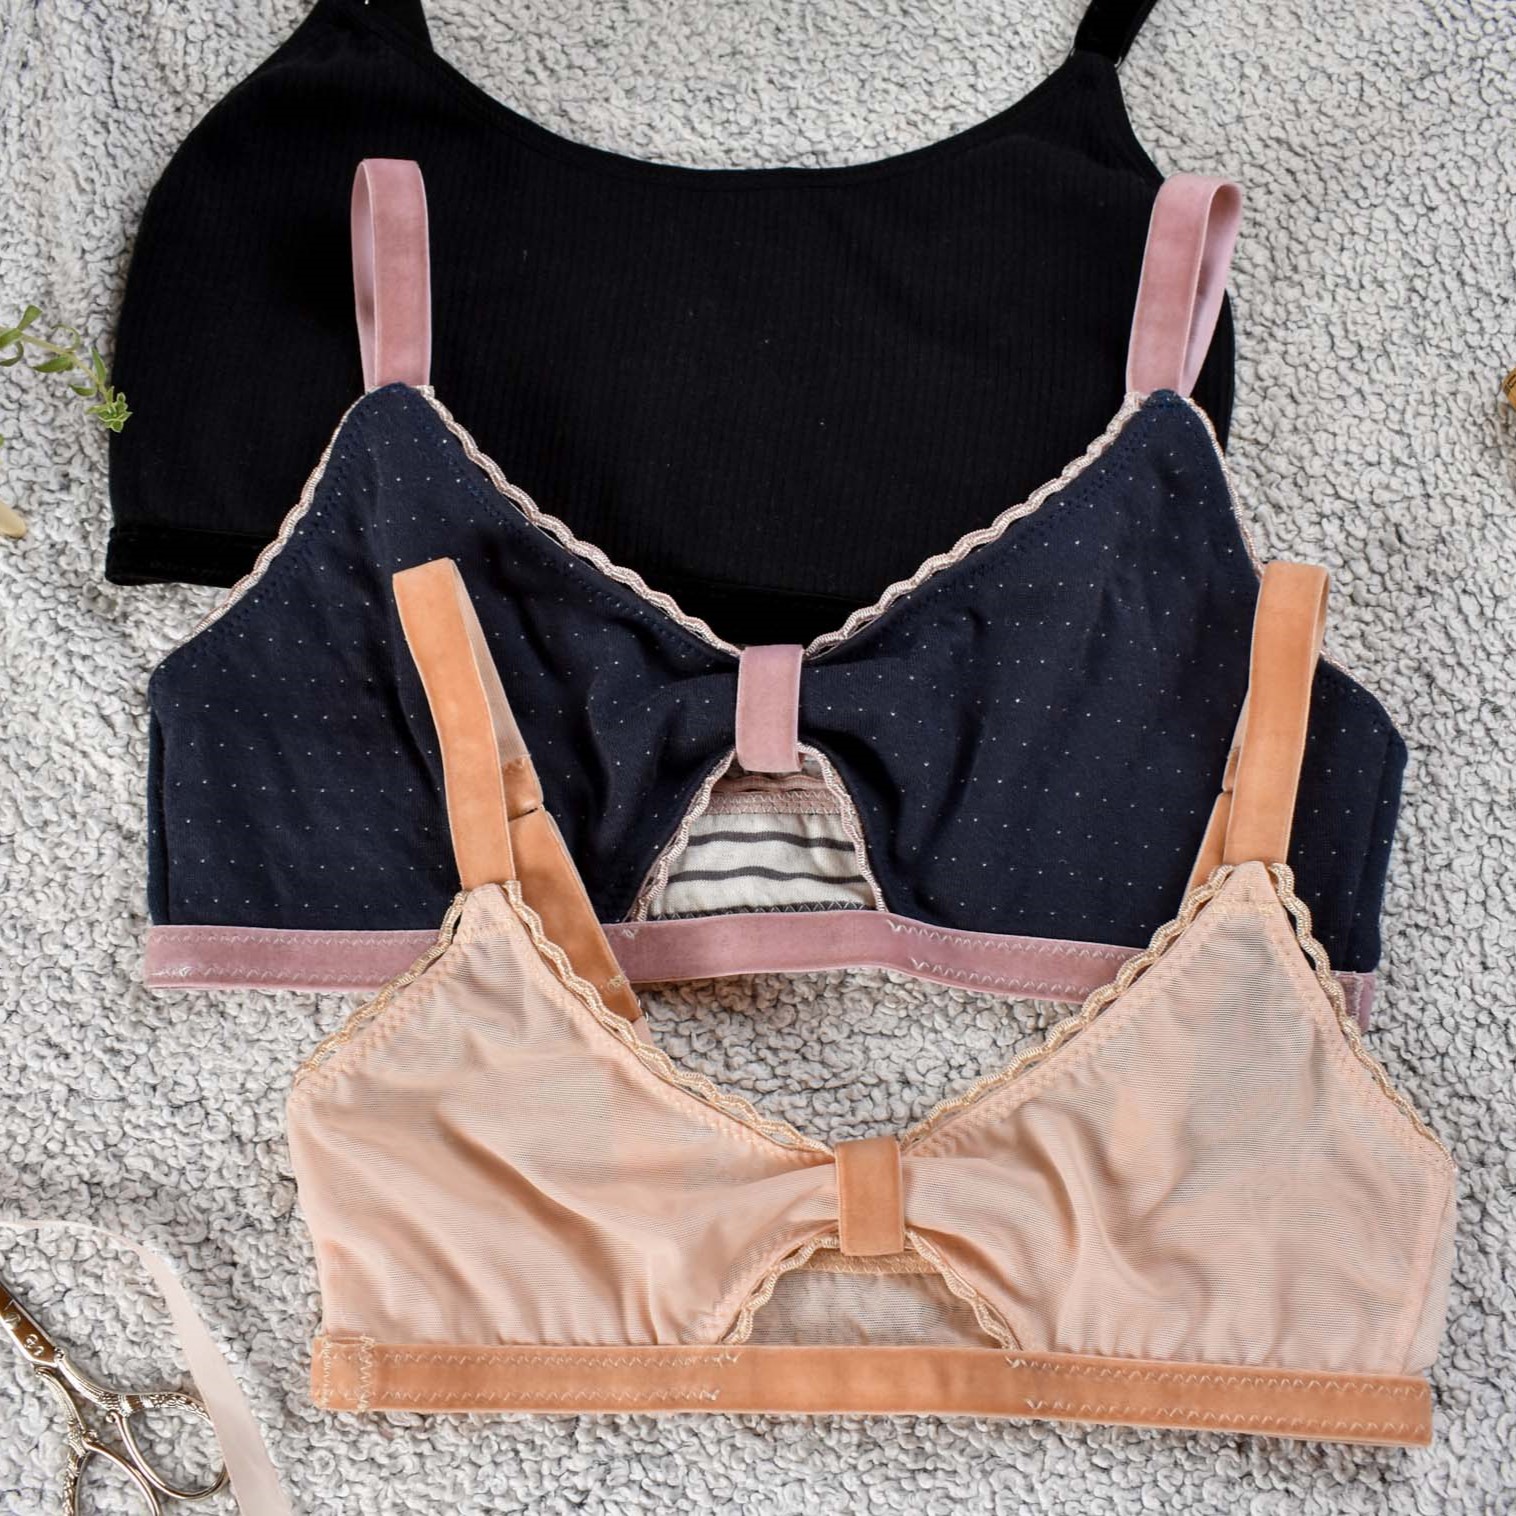 Sew Projects Barbary Bralette - The Fold Line